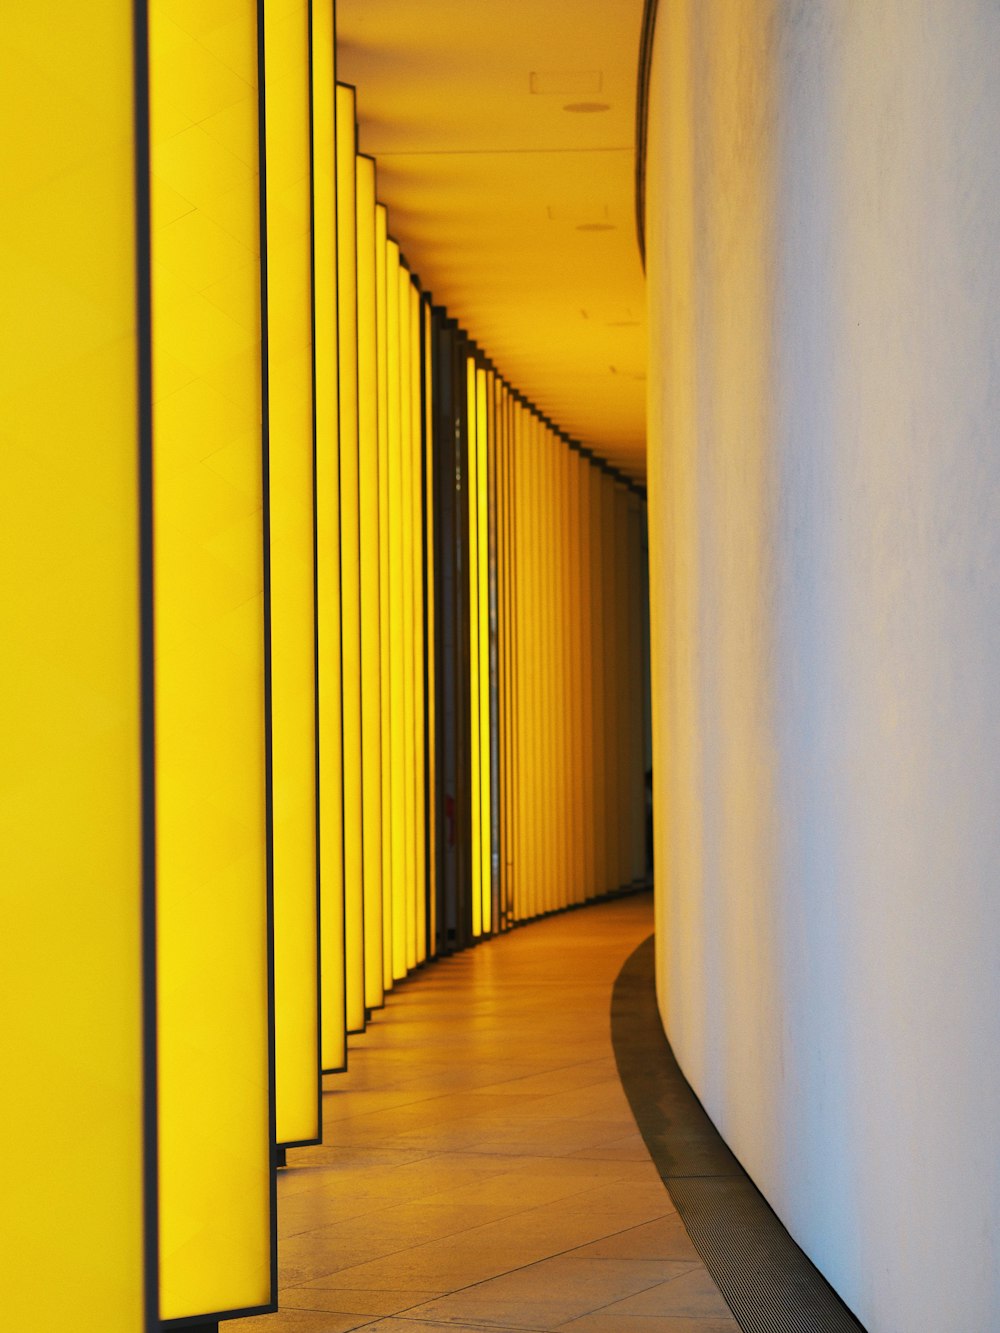 a long hallway with yellow walls and a clock on the wall